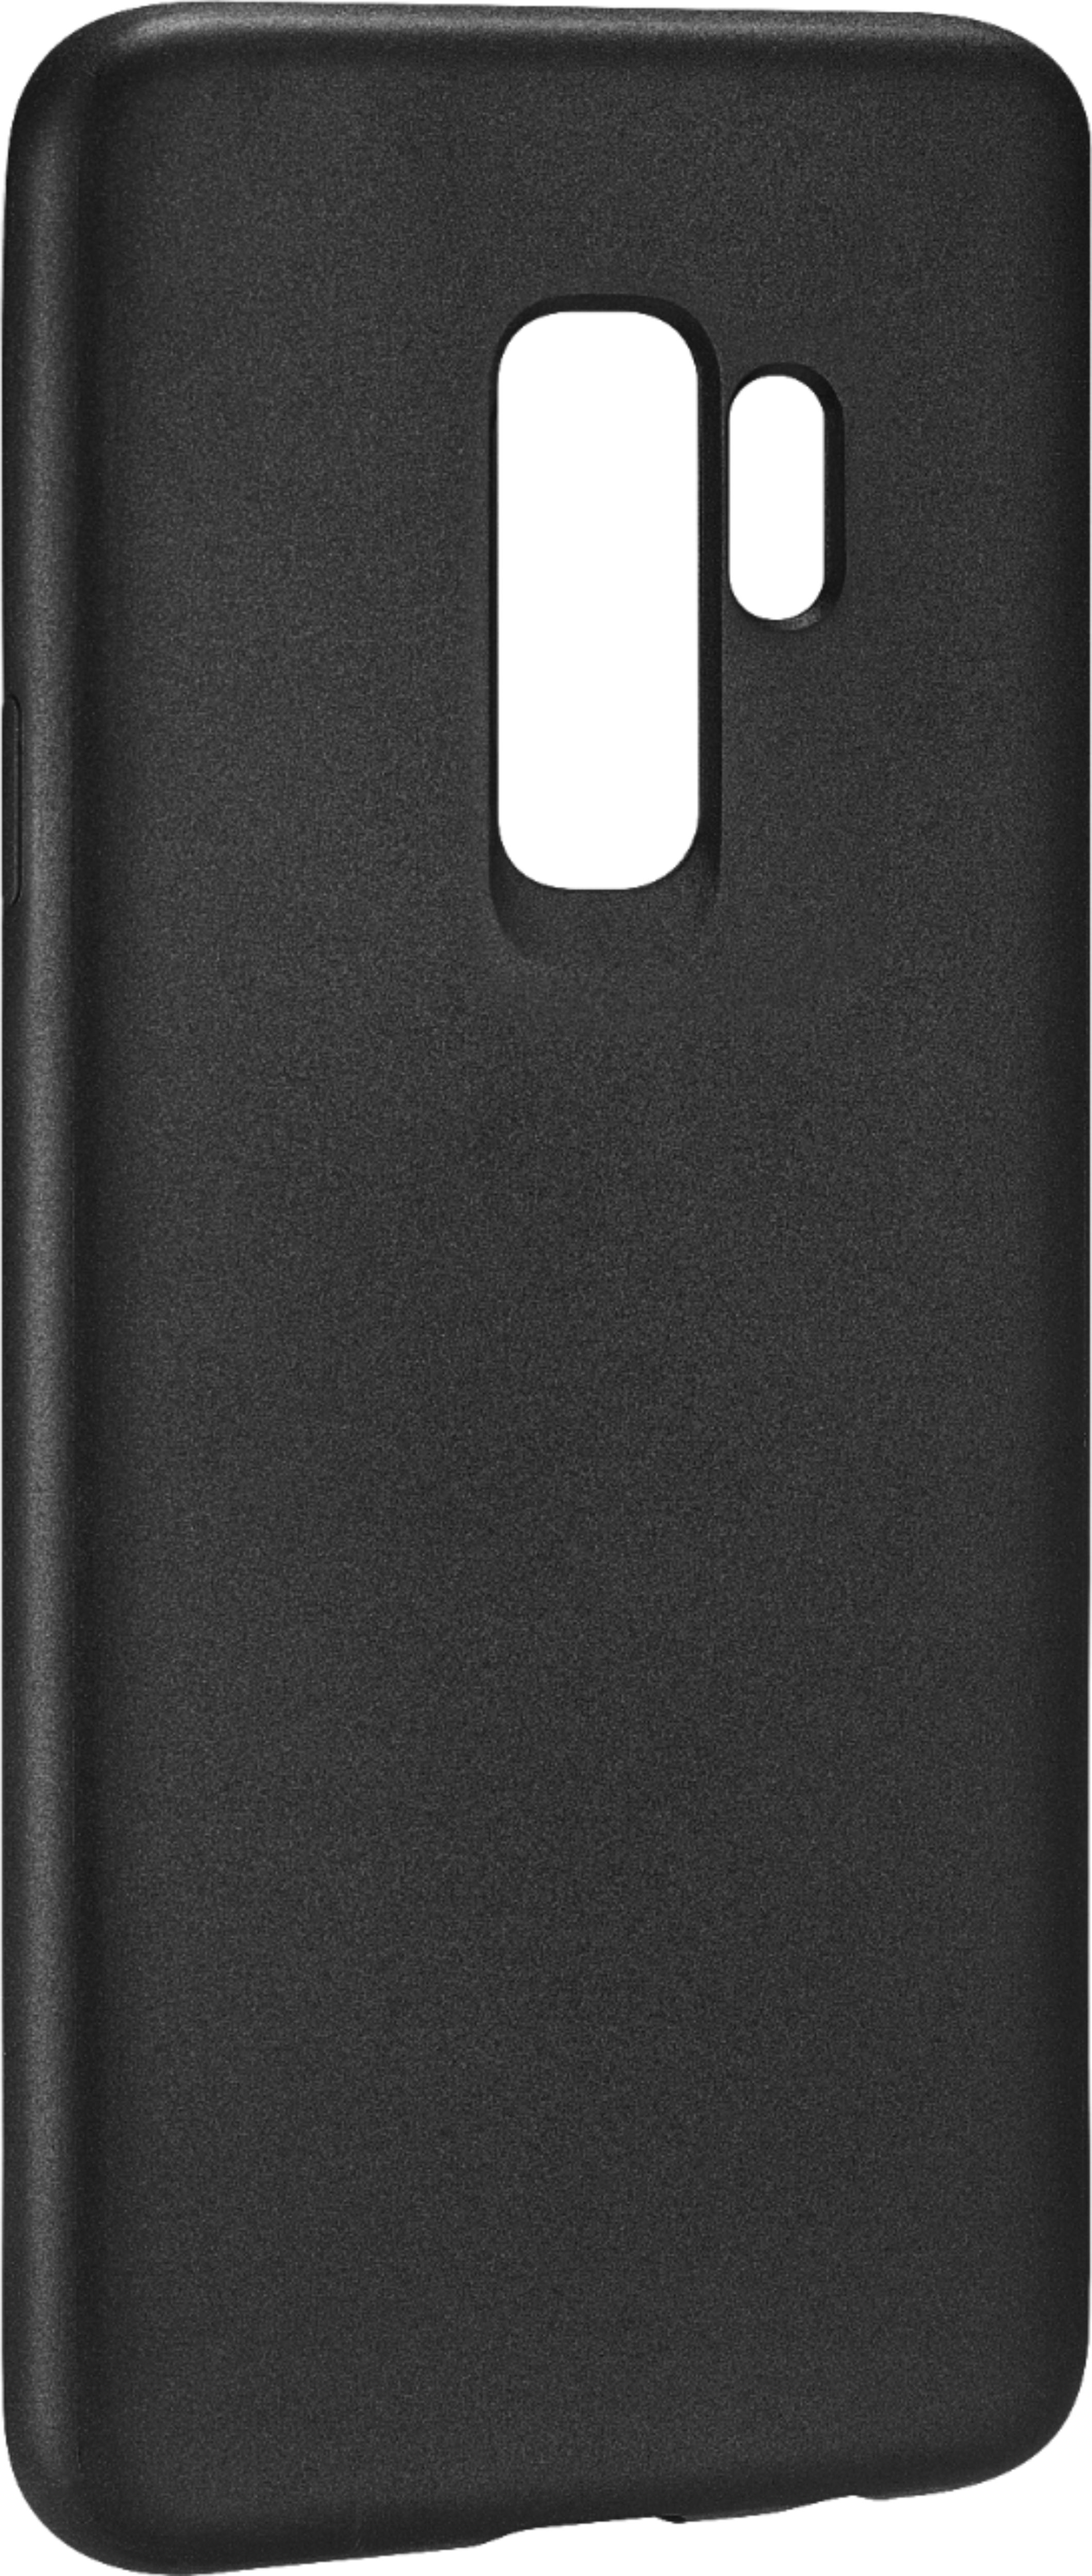 Best Buy: Insignia™ Soft-Shell Case for Samsung Galaxy S9+ Black NS-MGS9PTB